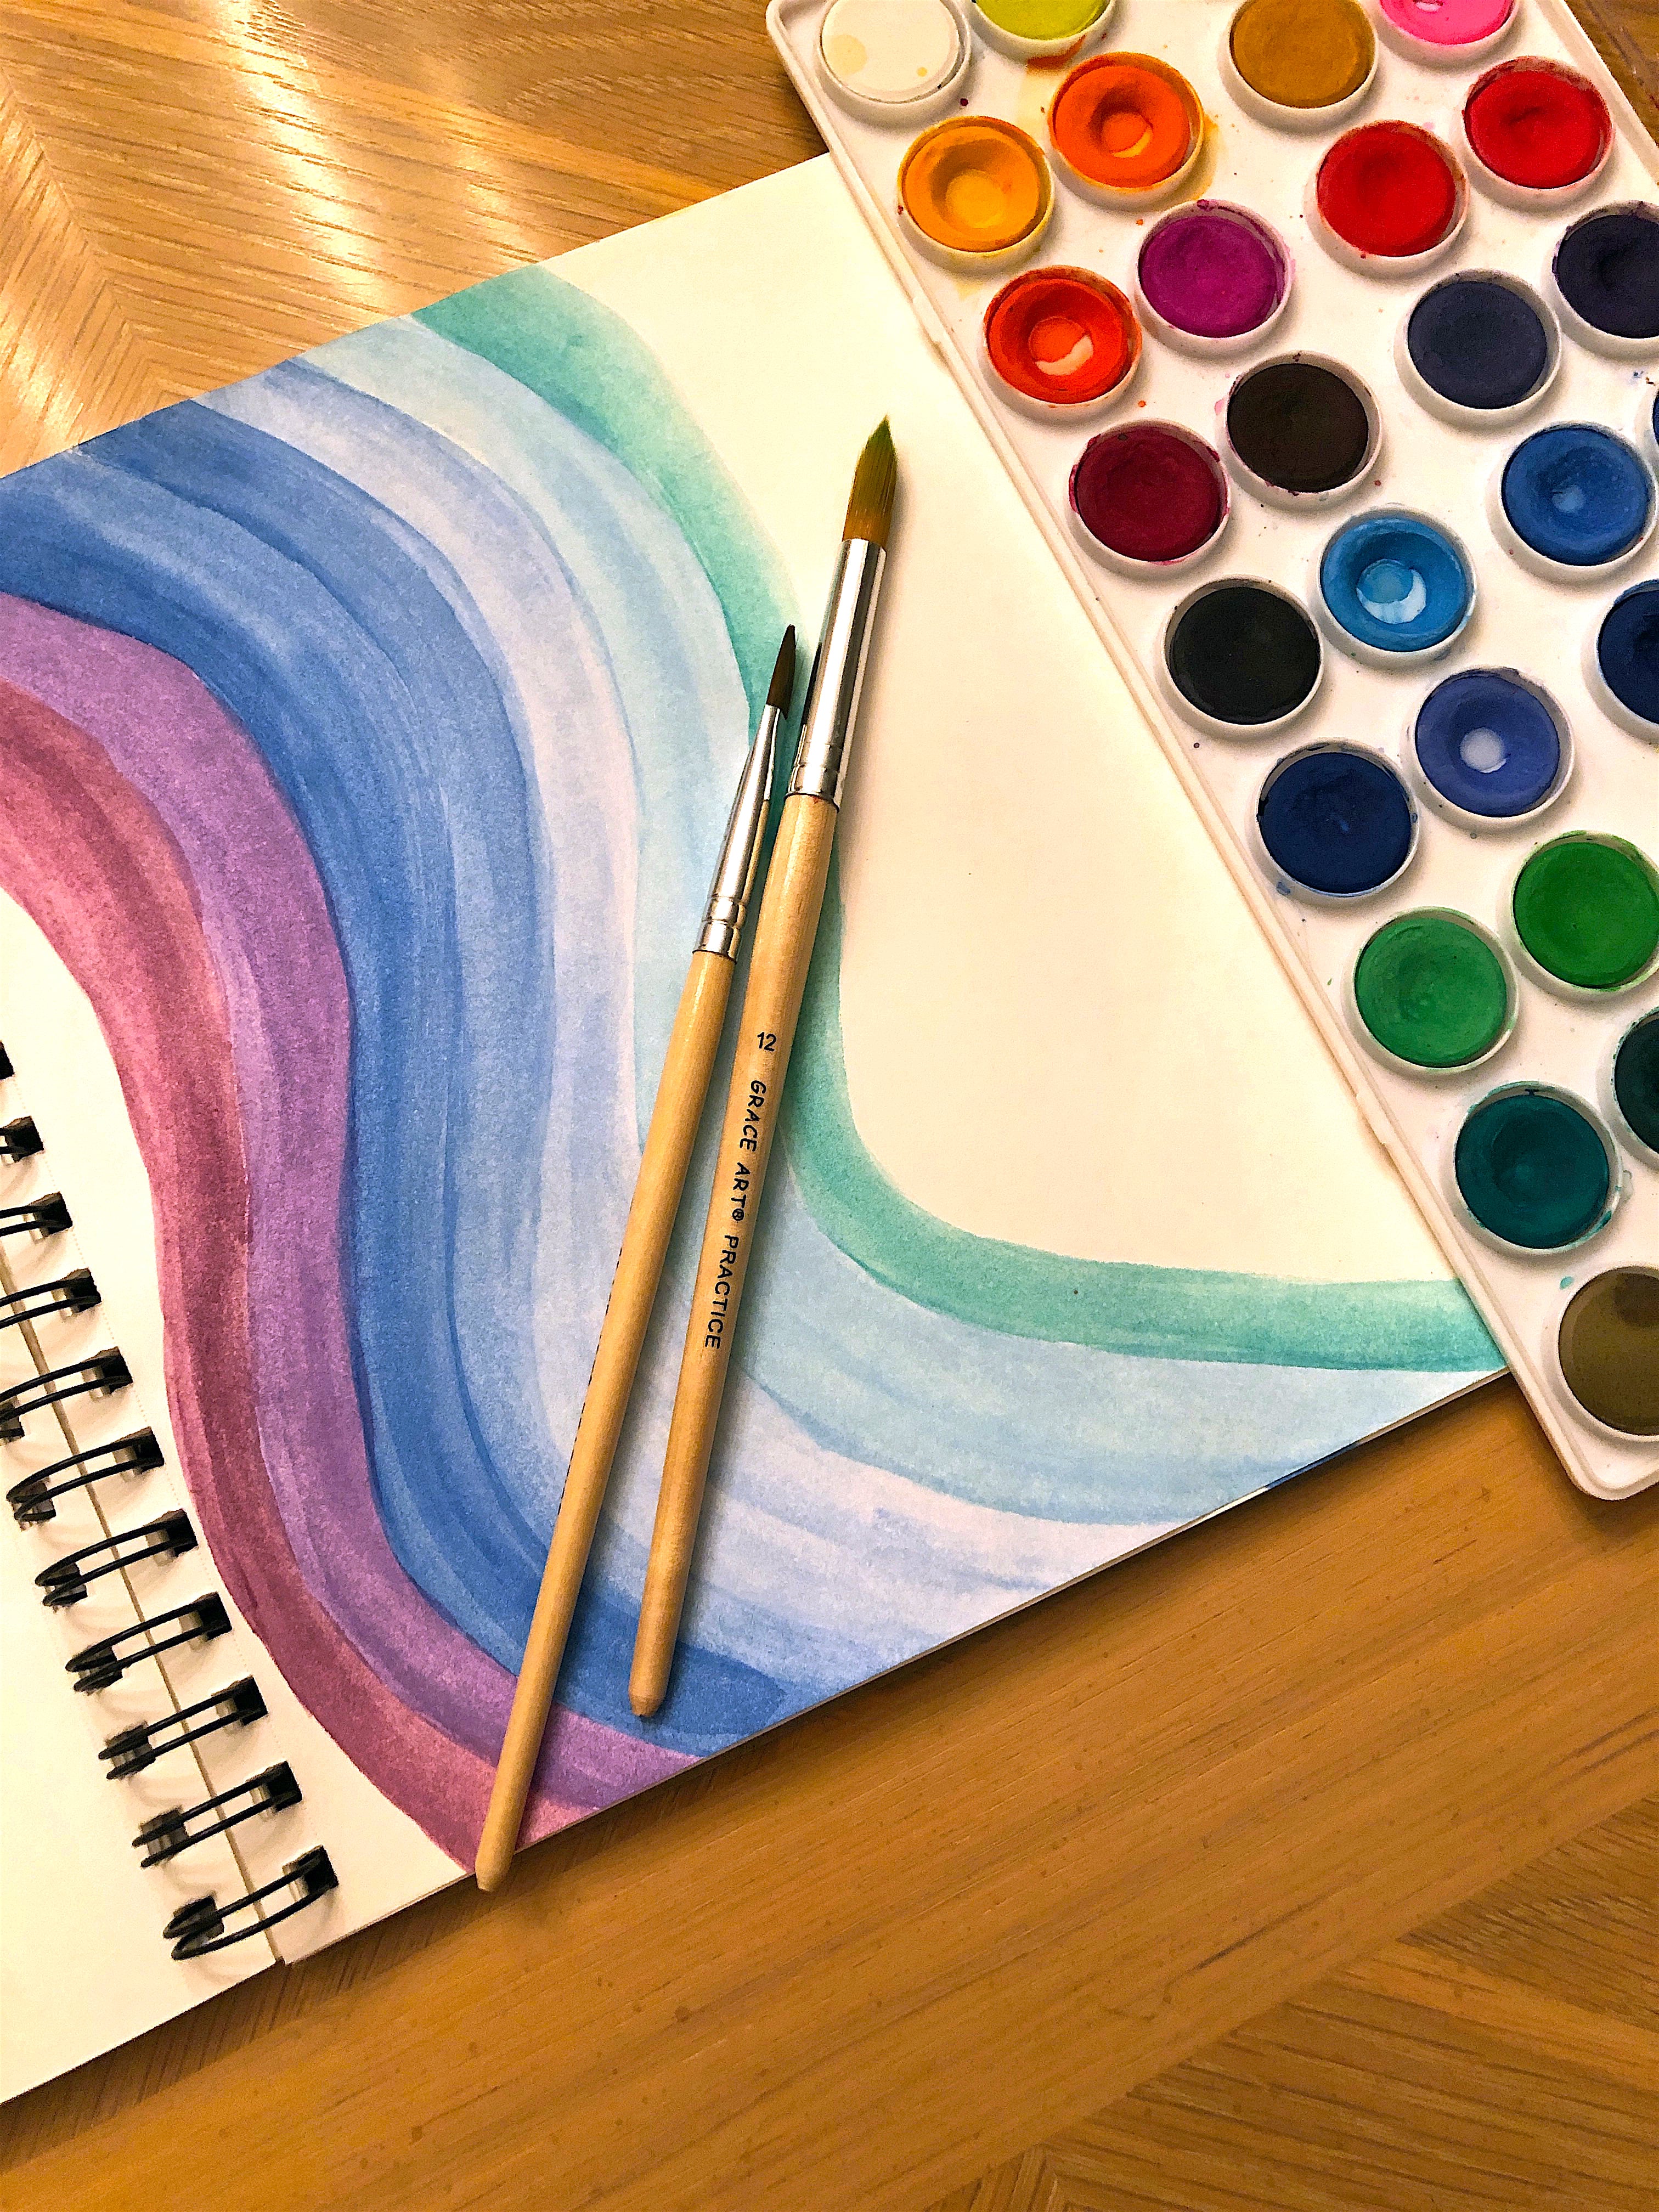 How to make watercolor paint: handmade watercolors - Lost in Colours